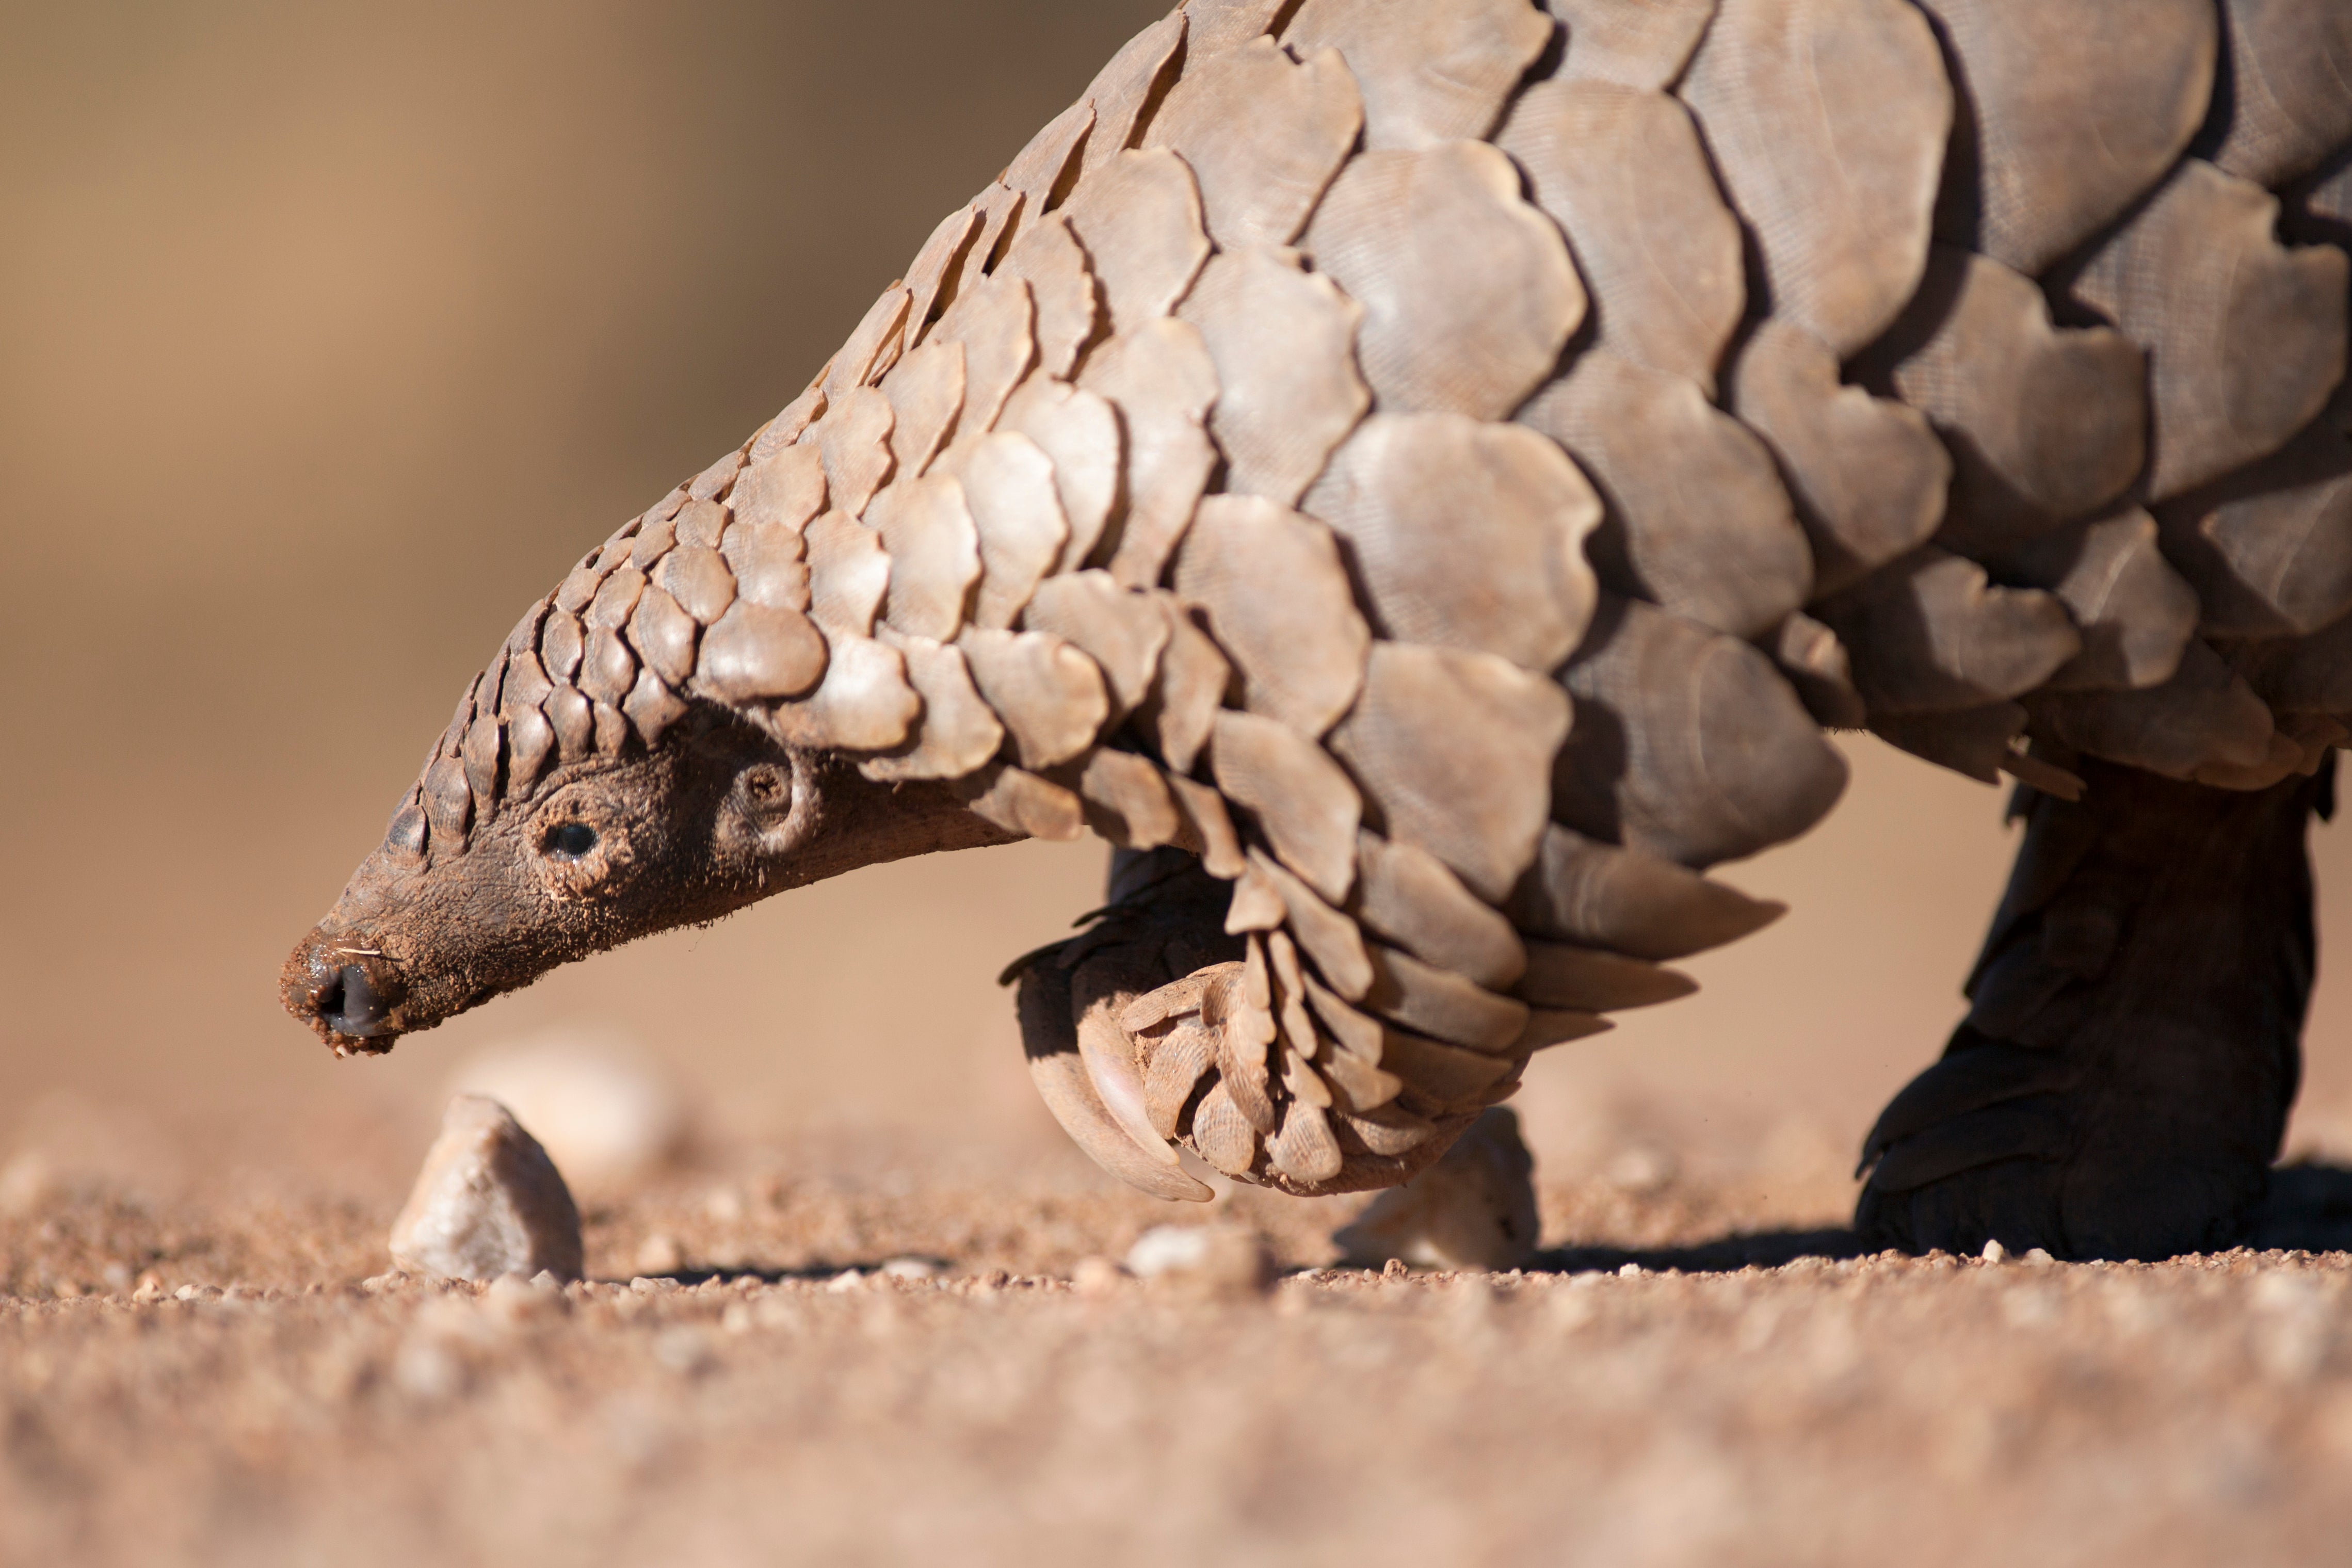 The pangolin has been dubbed the ‘most trafficked mammal in the world’ by the WWF